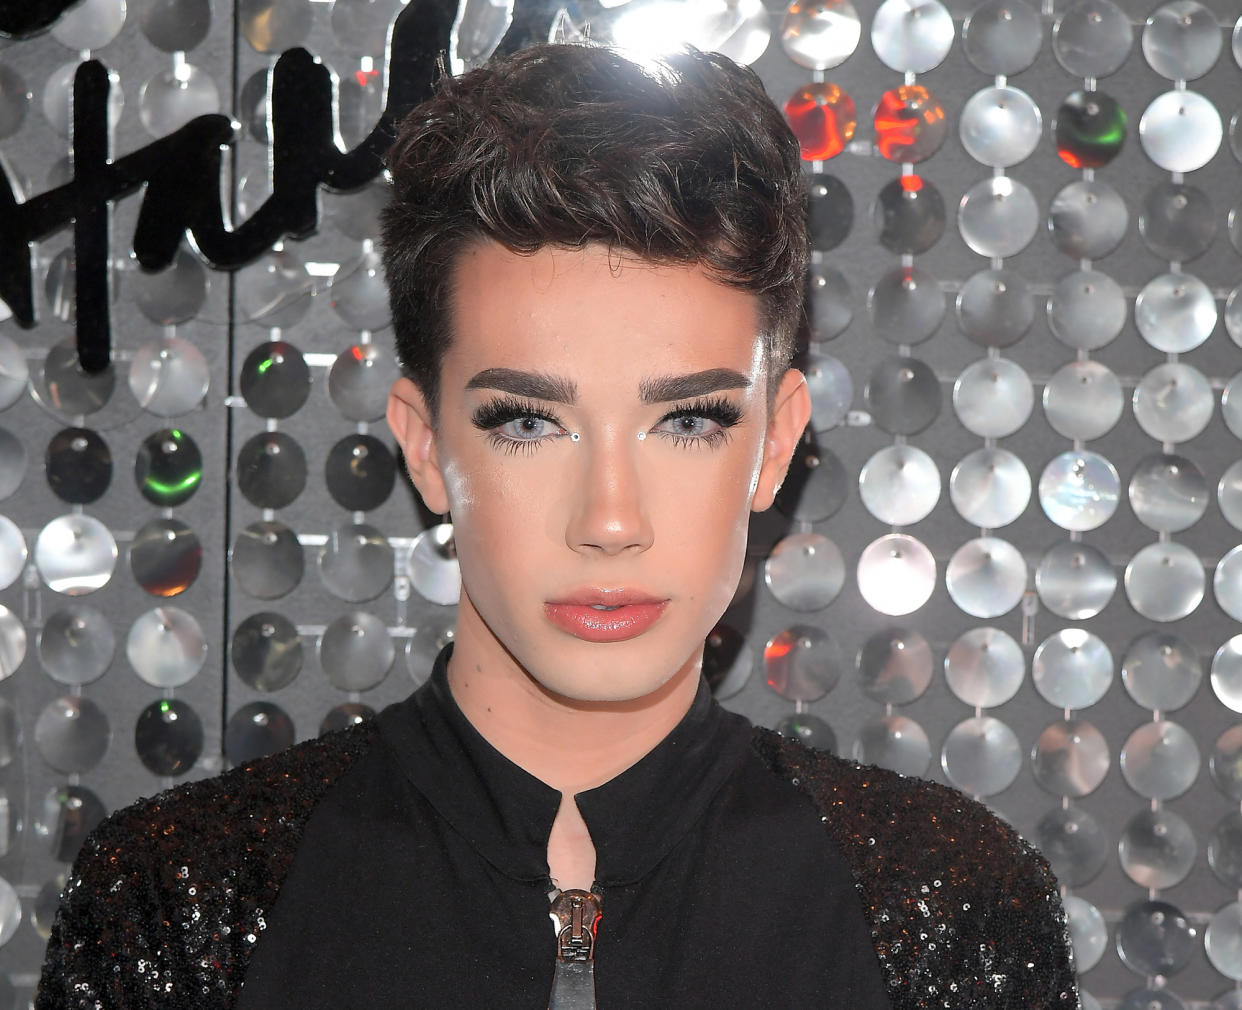 James Charles made his own versions of some of America’s favorite Christmas songs, all while creating a holiday makeup look. (Photo: Getty Images)